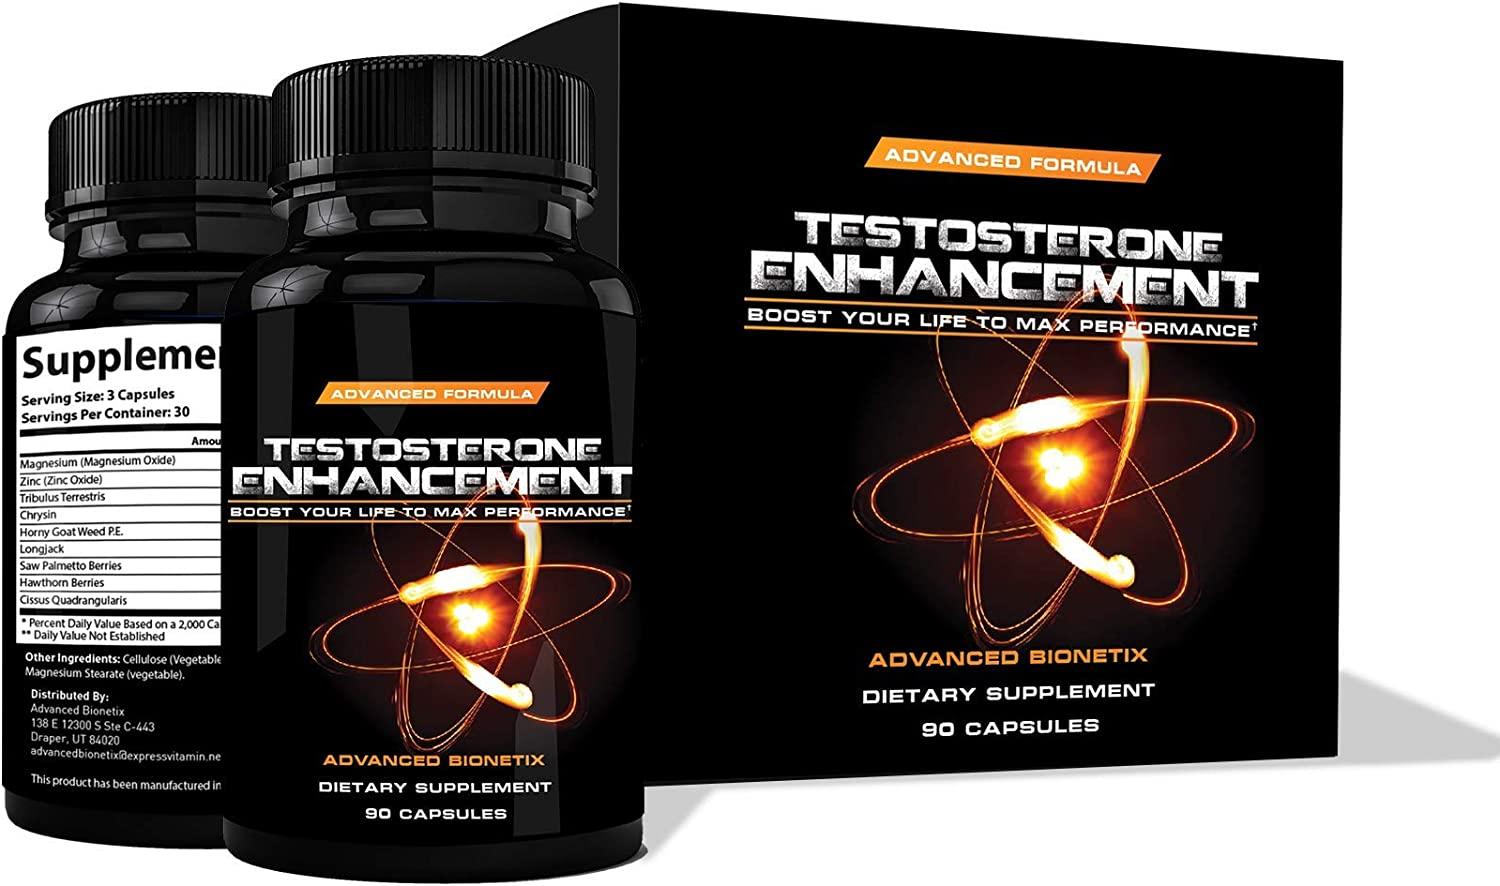 Testosterone Booster Male Enhancement. #1 Recommended by Men Over The Age  of 40* Increase libido, Energy, Lean Muscle. Melt Away Fat with Zinc,  Tribulus, Horny Goat Weed & More Powerful Ingredients